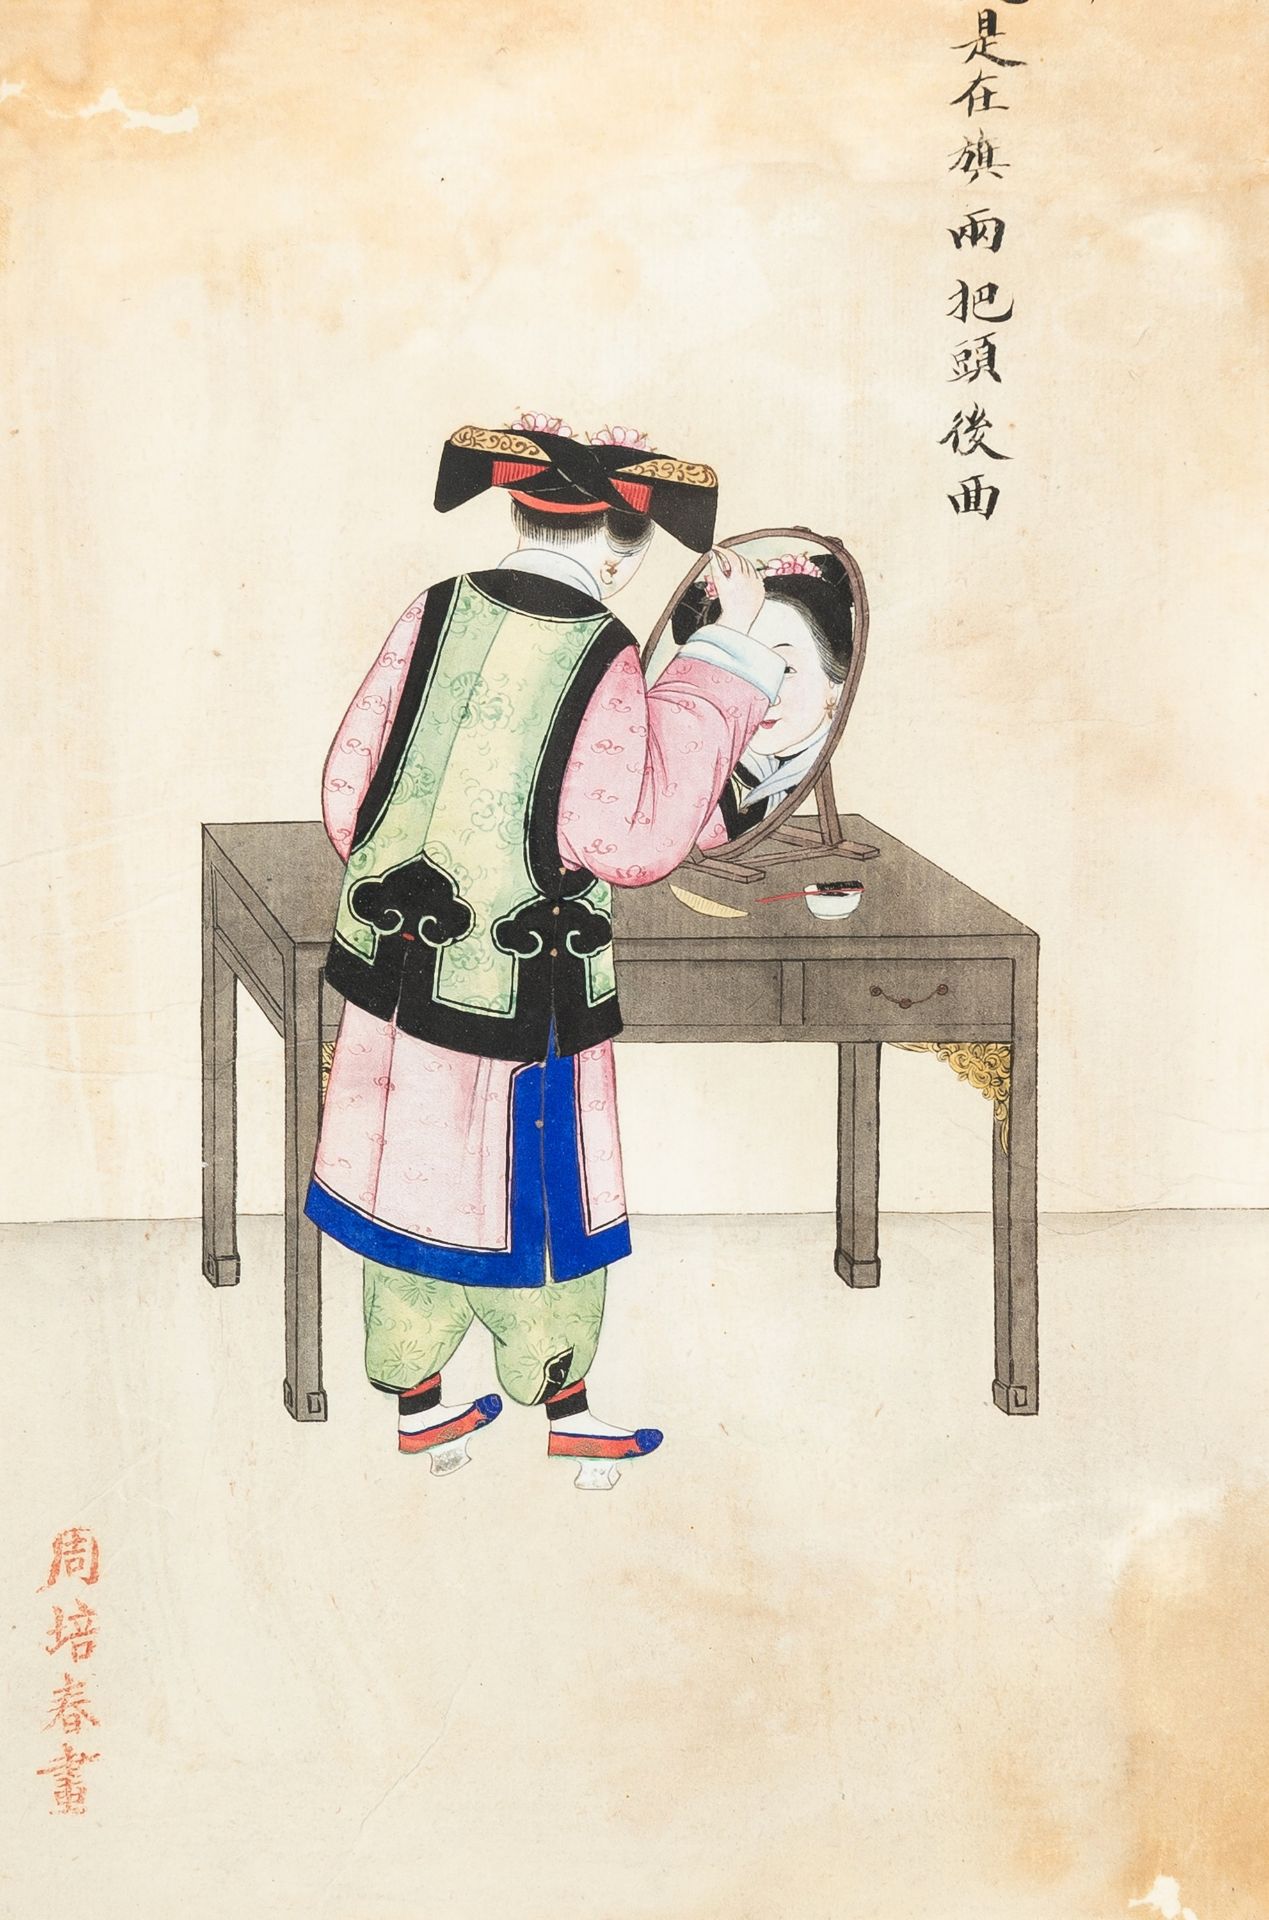 ZHOU PEI CHUN (active 1880-1910): A PAINTING OF A MANCHU COURT LADY STYLING HER HAIR, 1900s